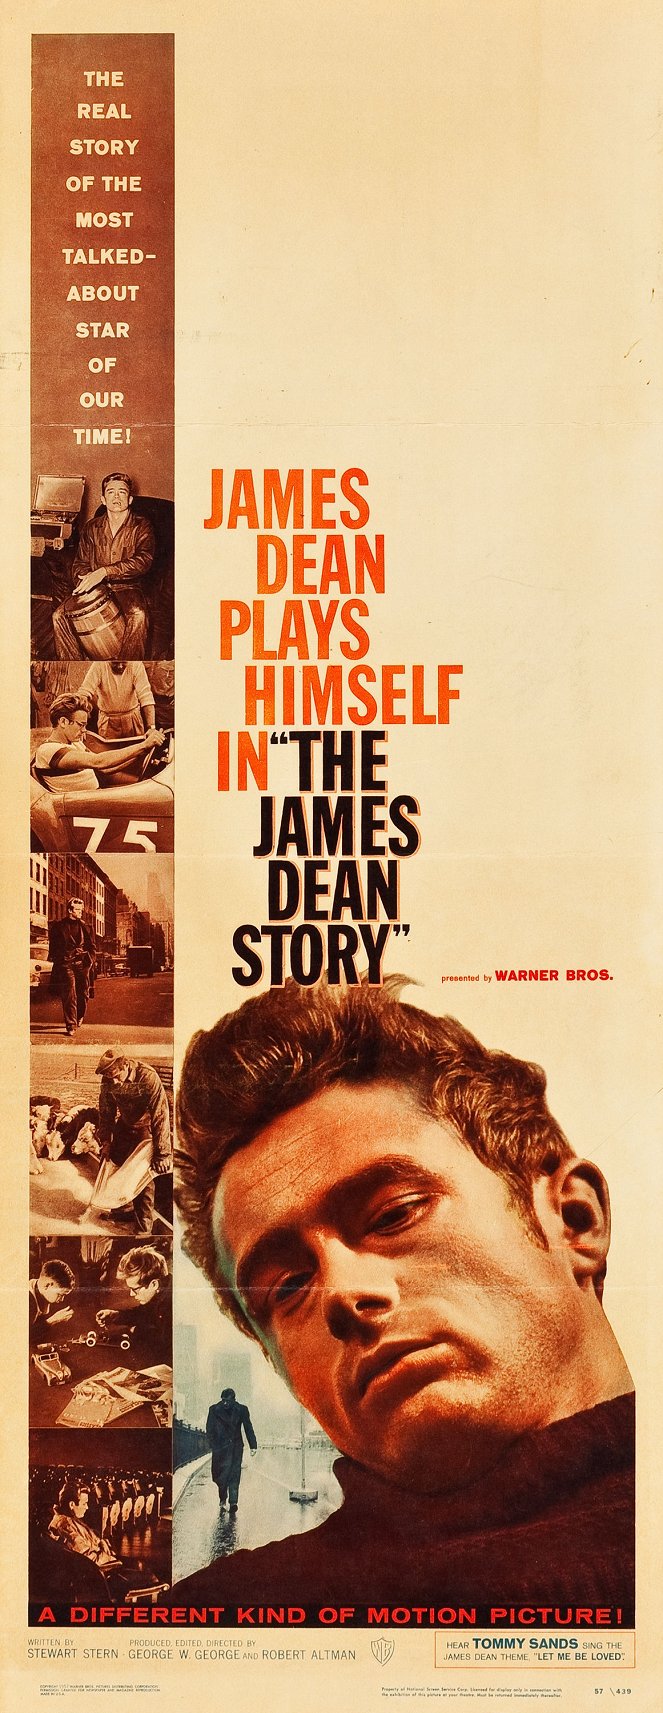 The James Dean Story - Posters